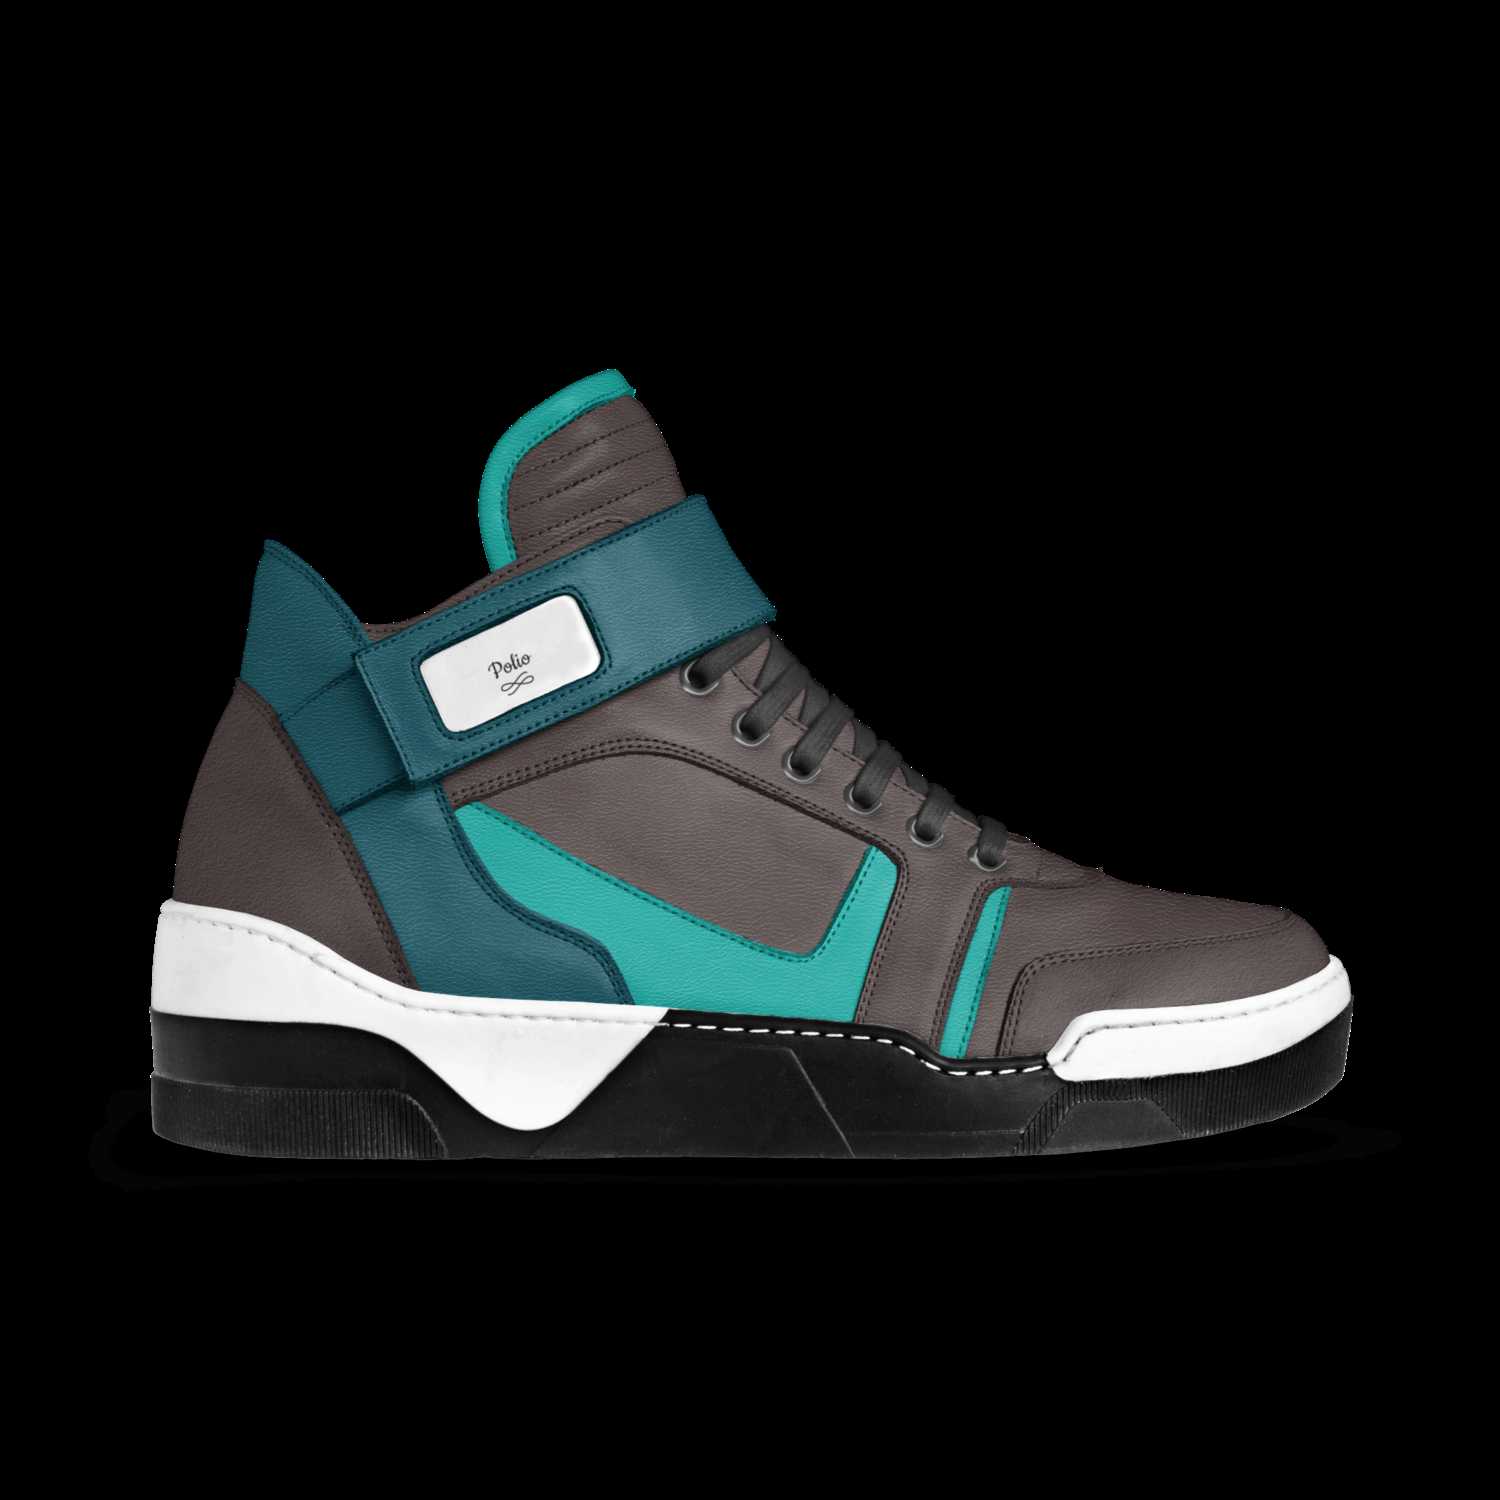 A Custom Shoe concept by Lucian Lipscomb